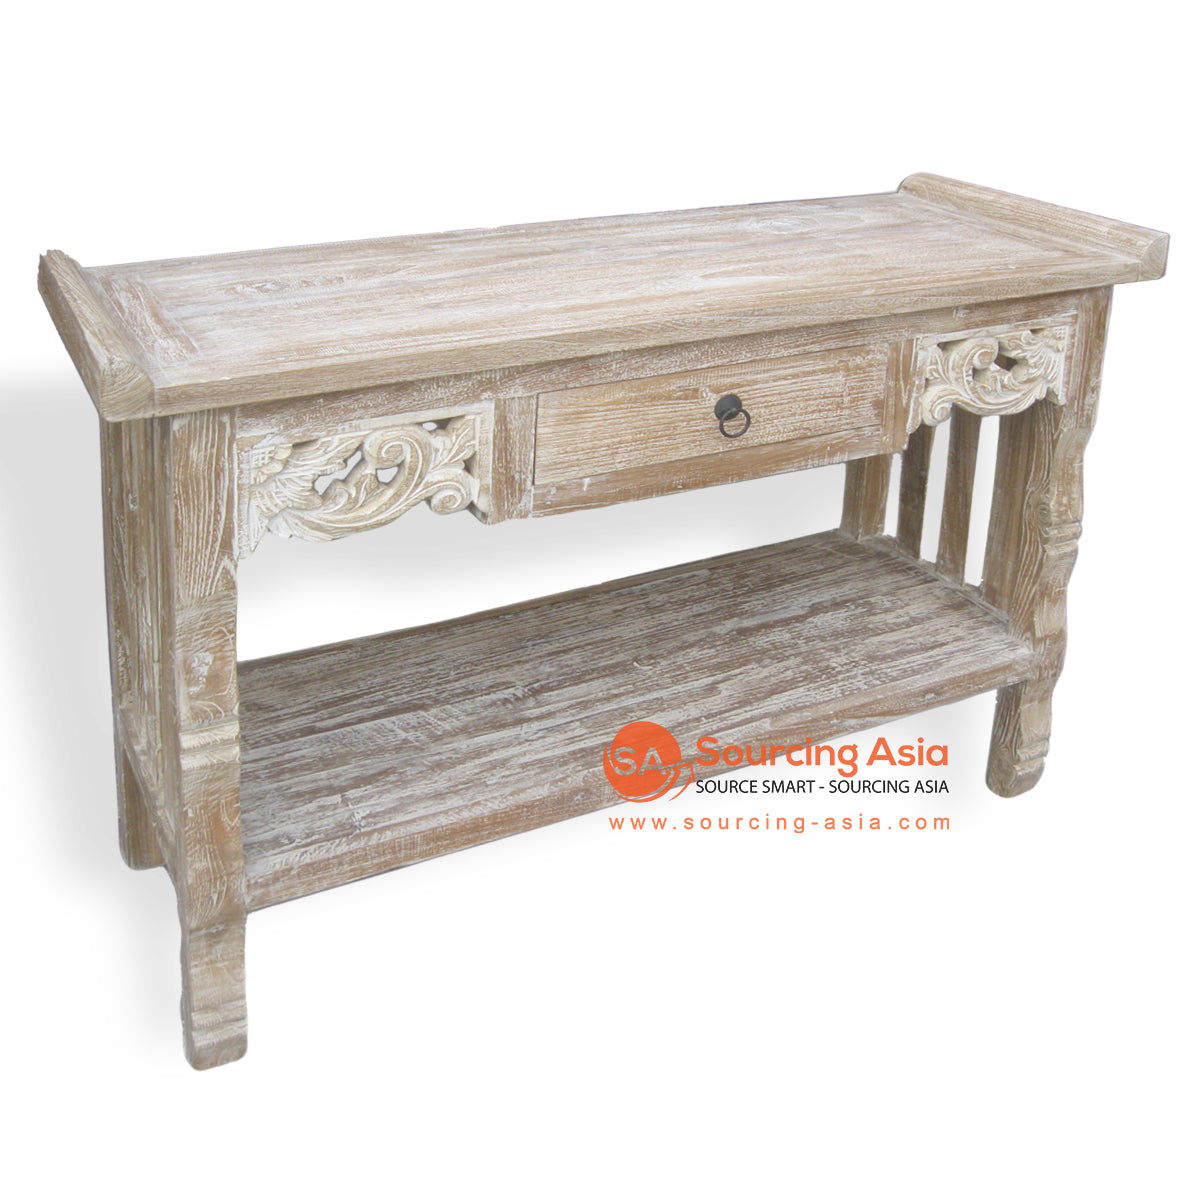 LAC017 WHITE WASH RECYCLED TEAK WOOD ONE DRAWER AND SHELF CARVED CONSOLE